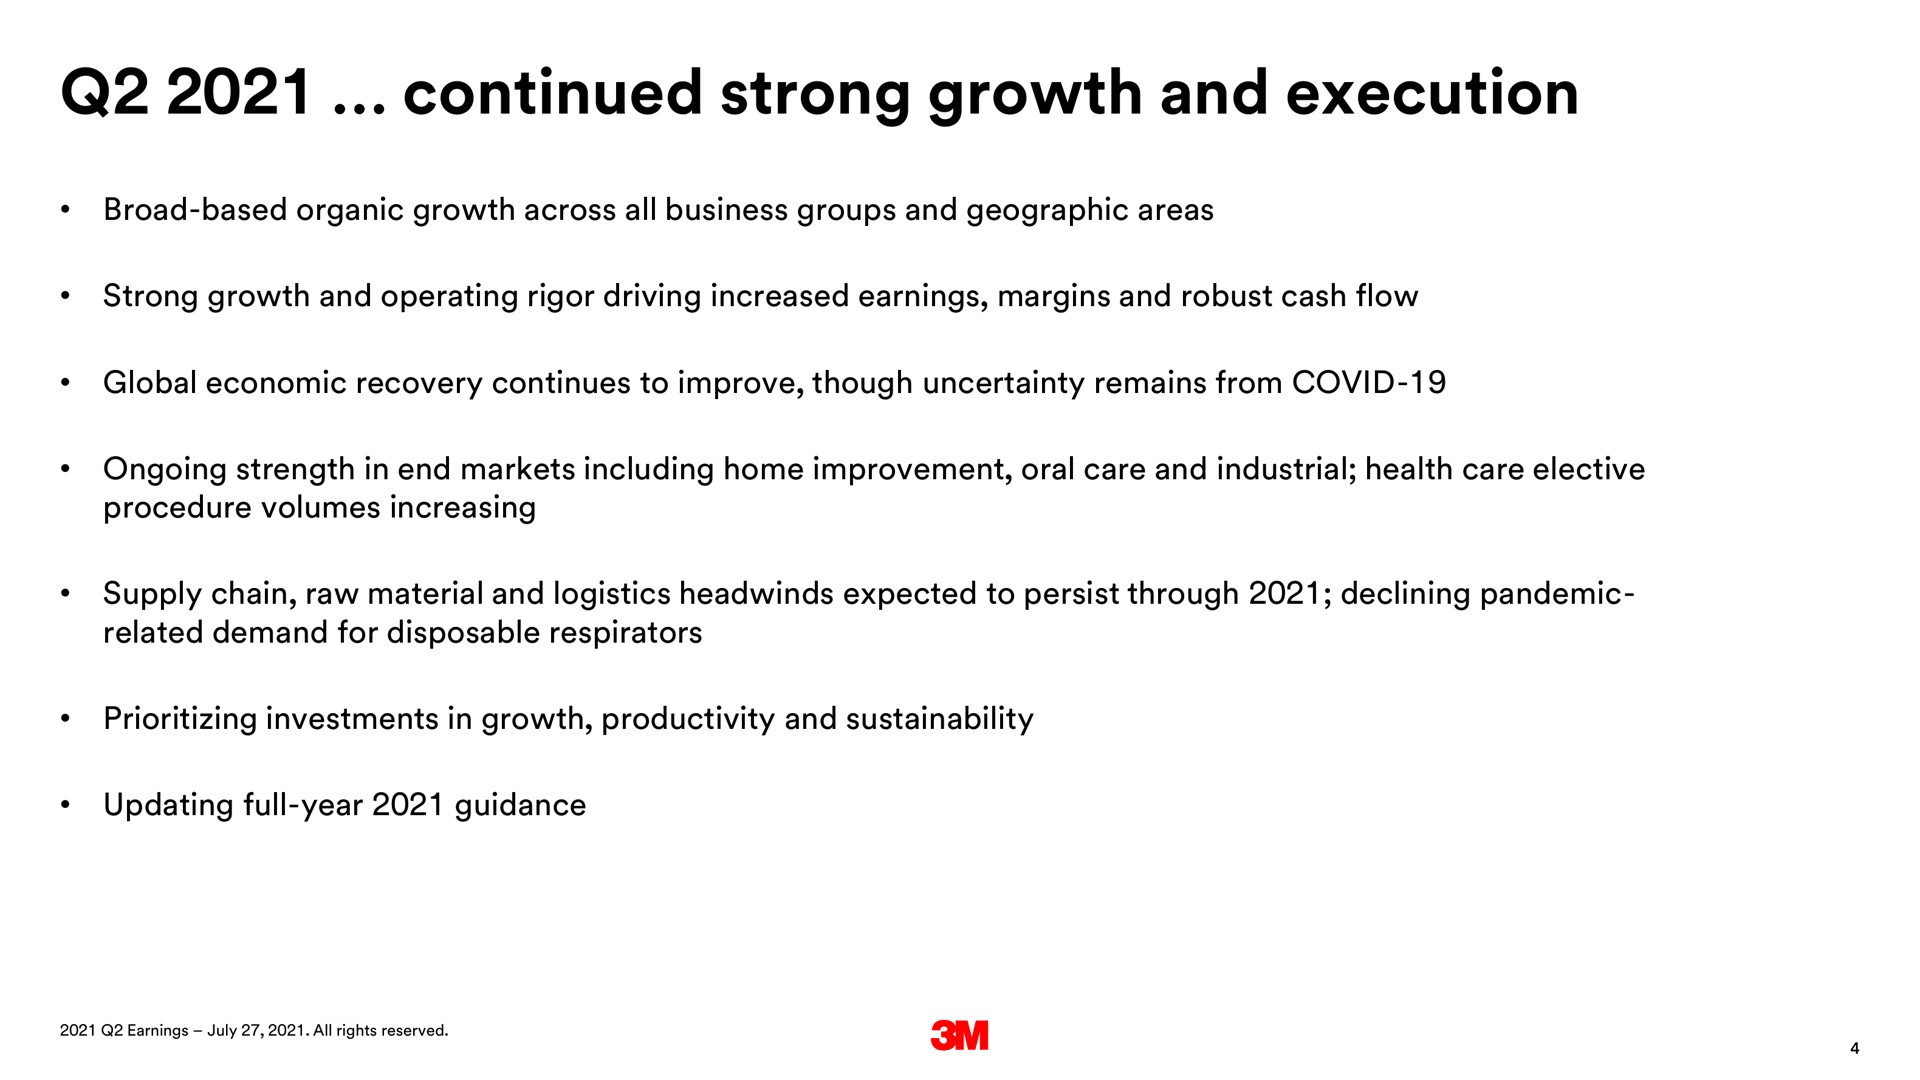 continued strong growth and execution vision | 3M